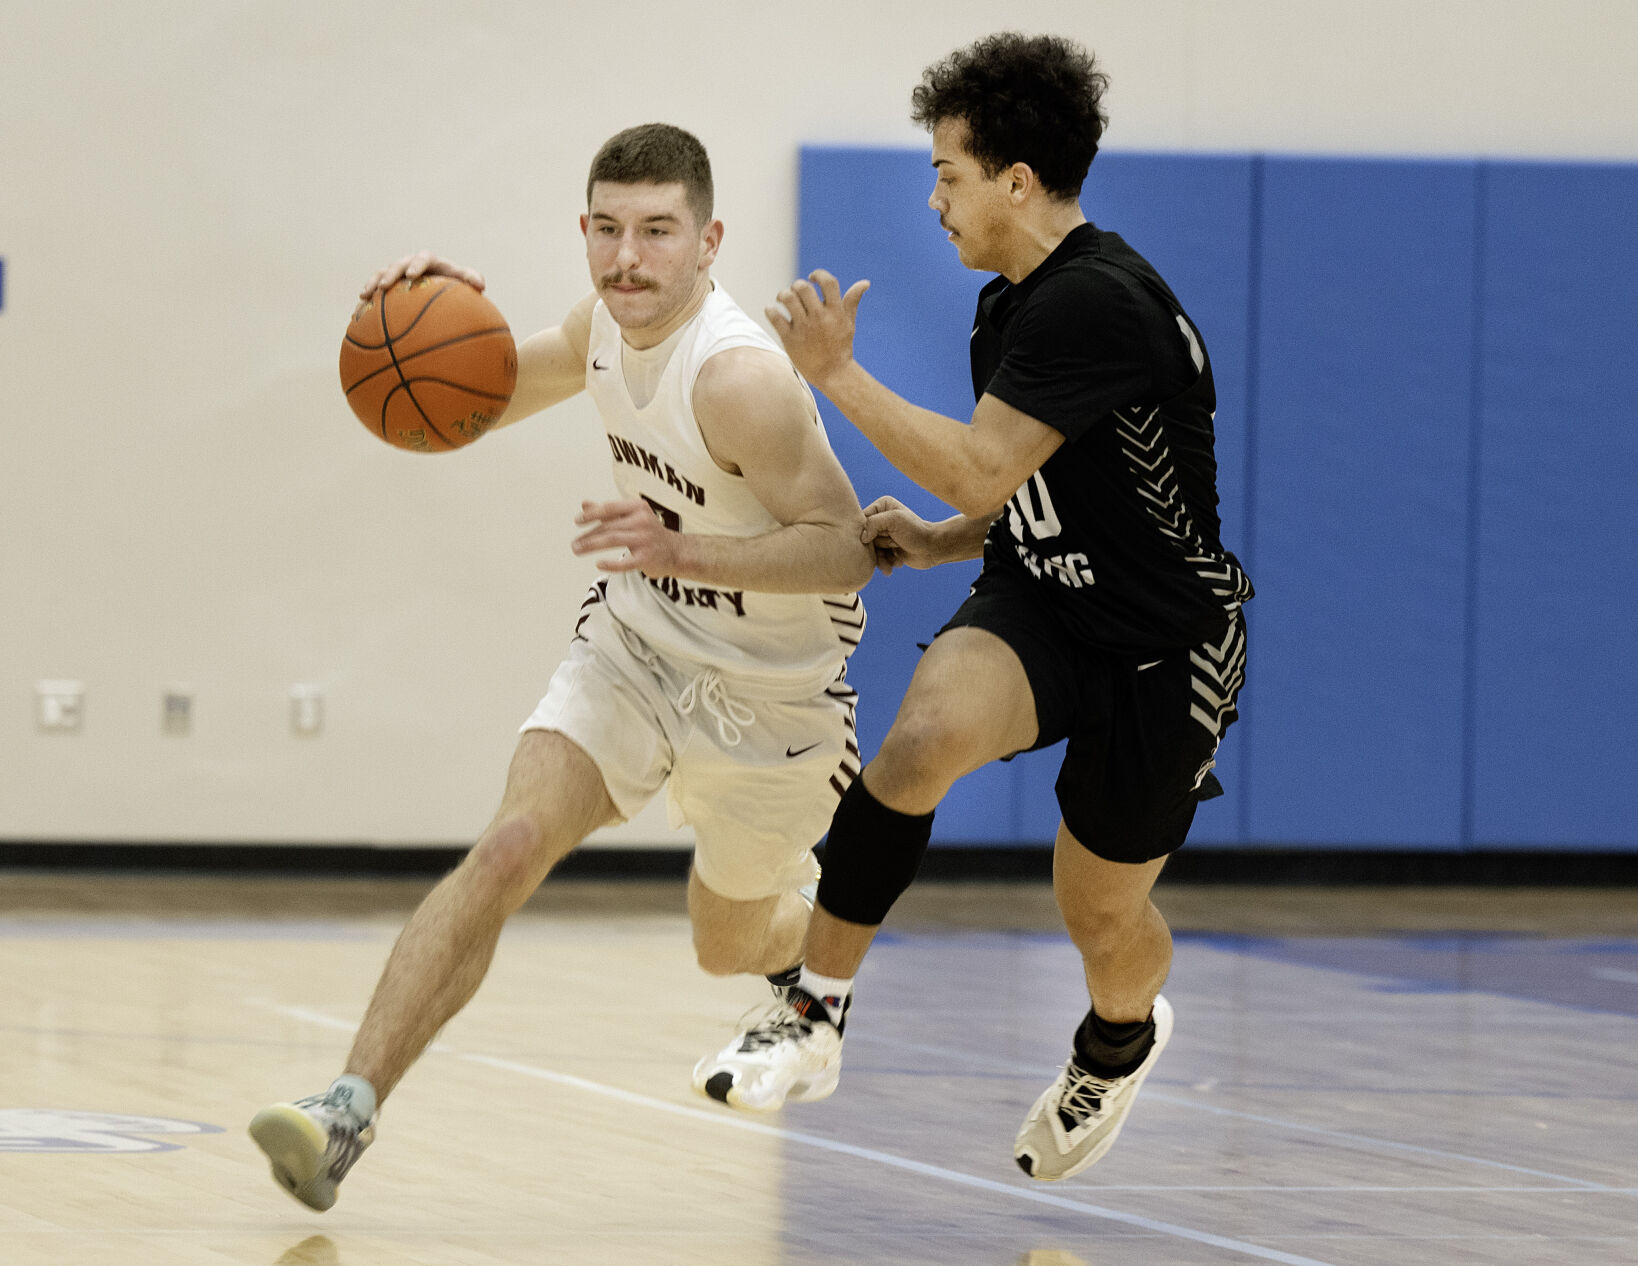 Class B All-State Basketball First Team Led by Braaten, Hagler, Duffield